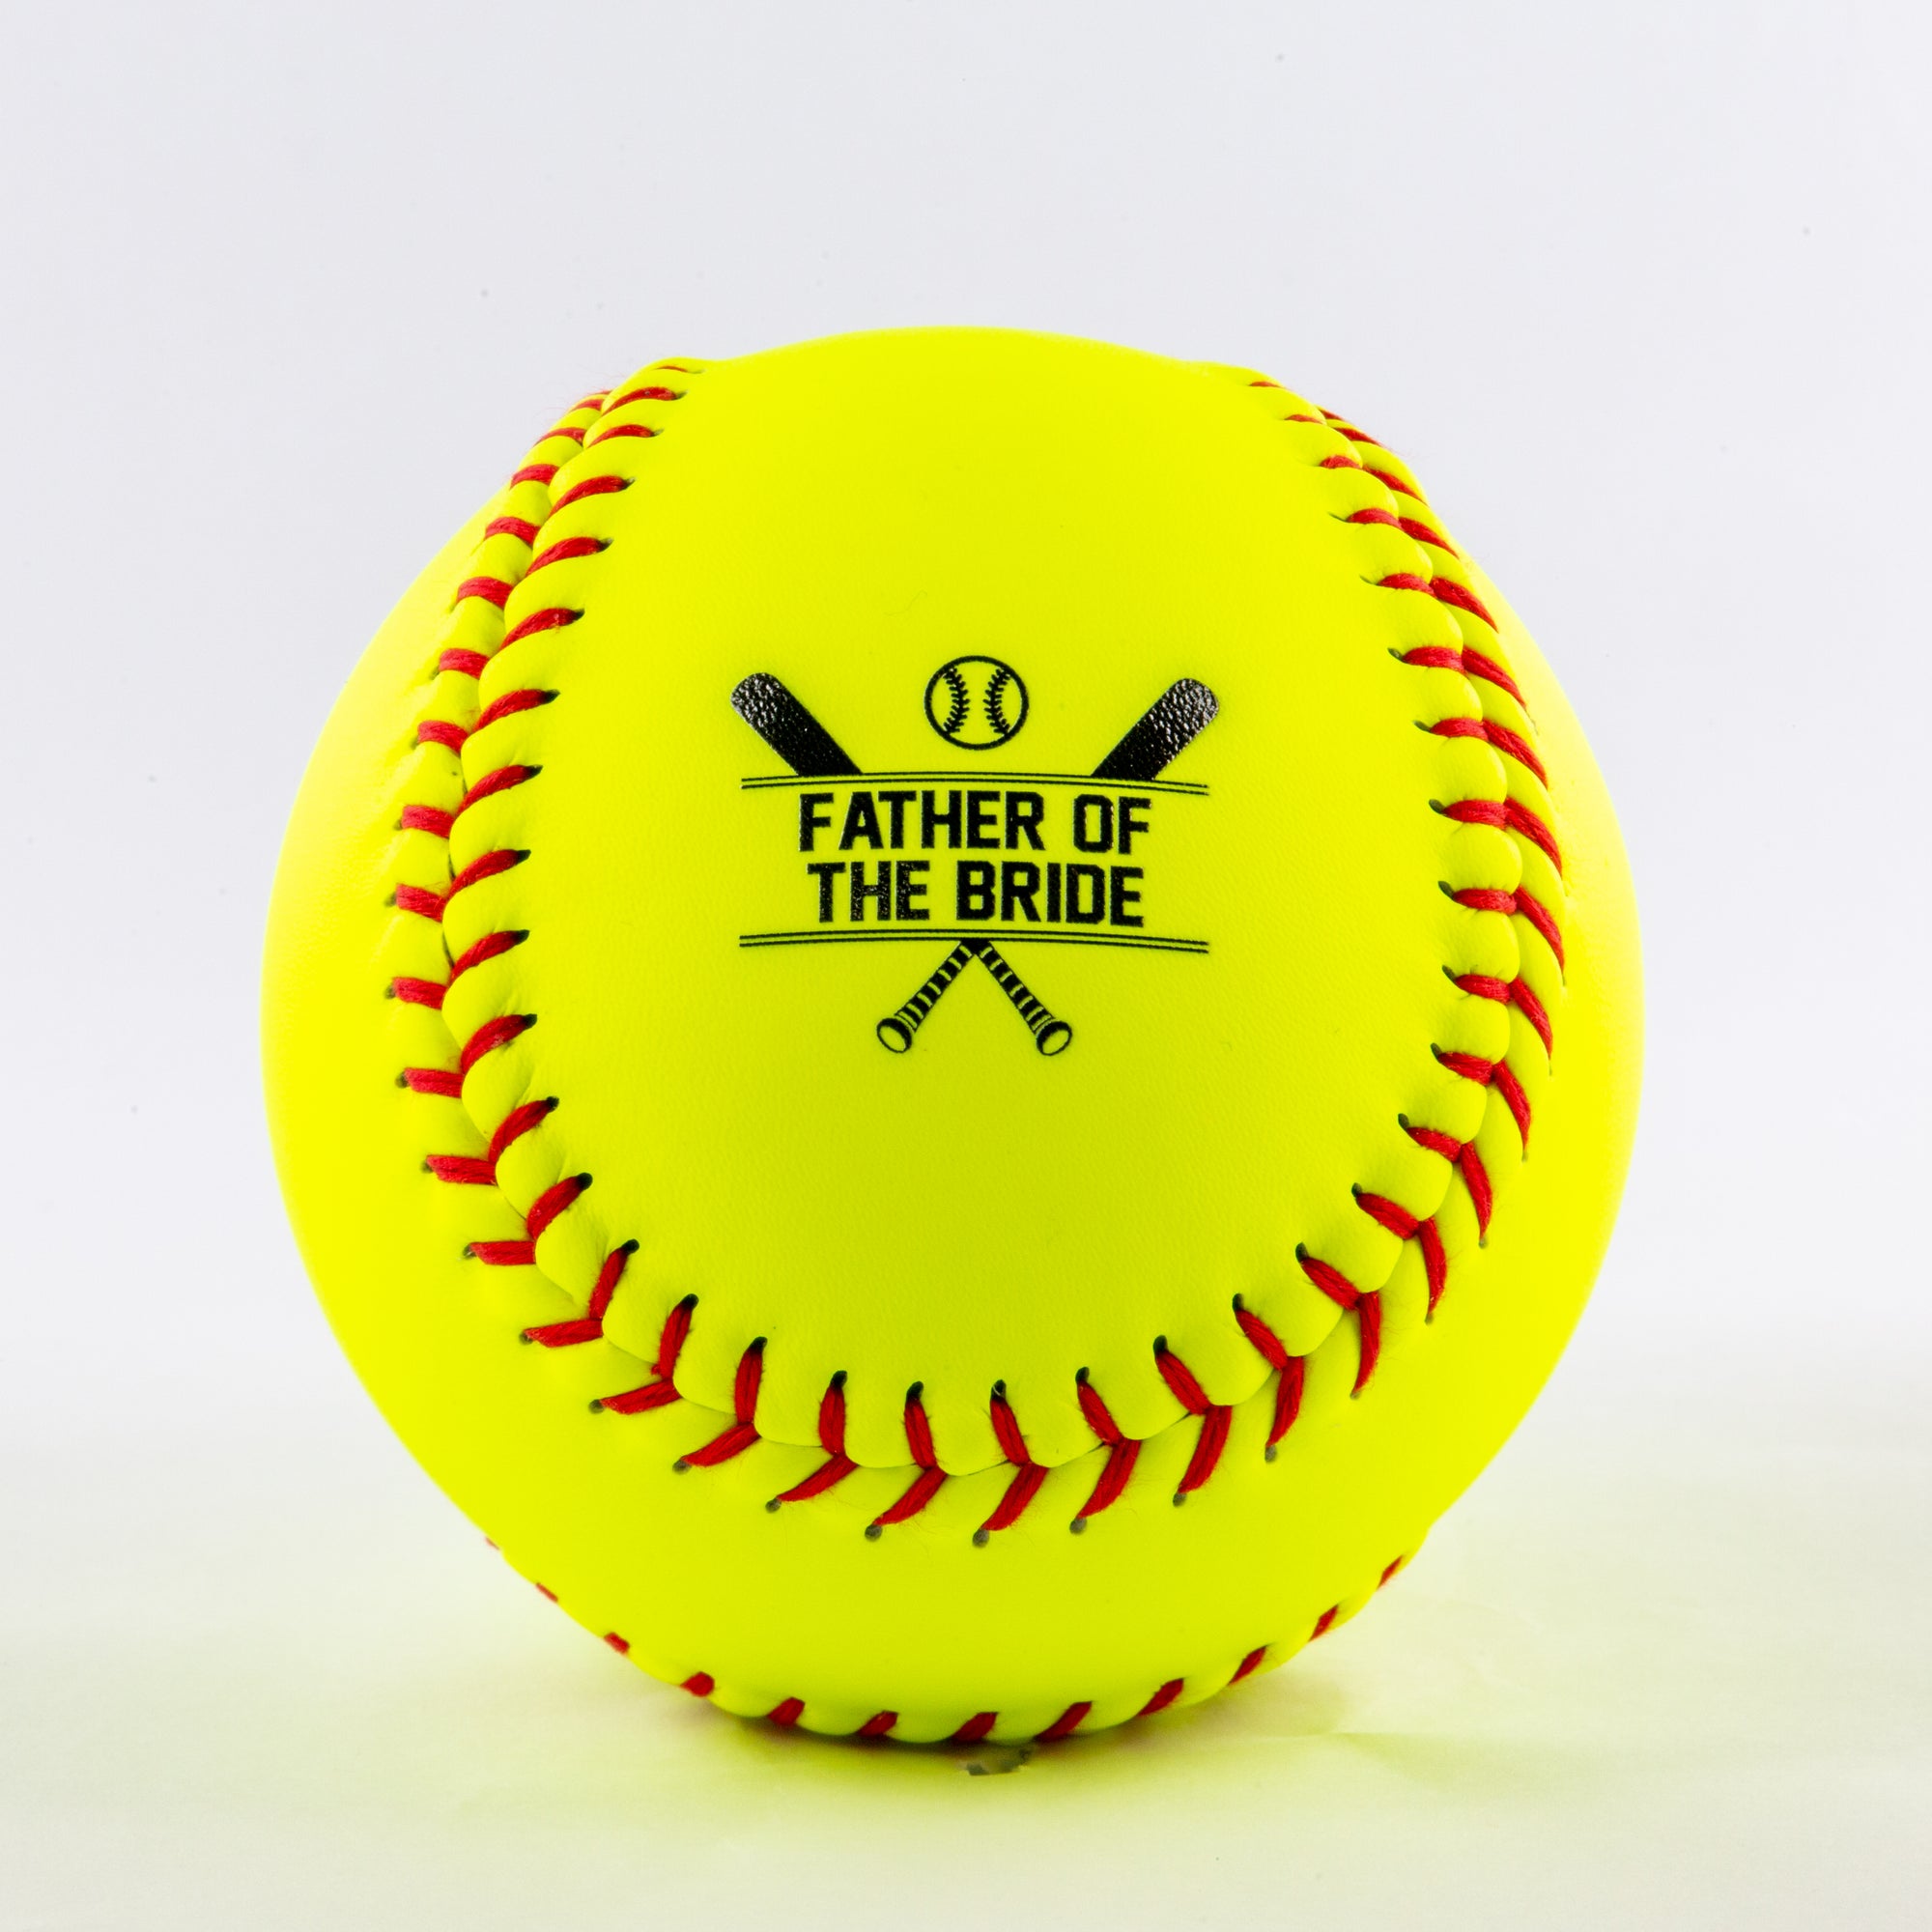 Printed Softball with Father of the Bride Design